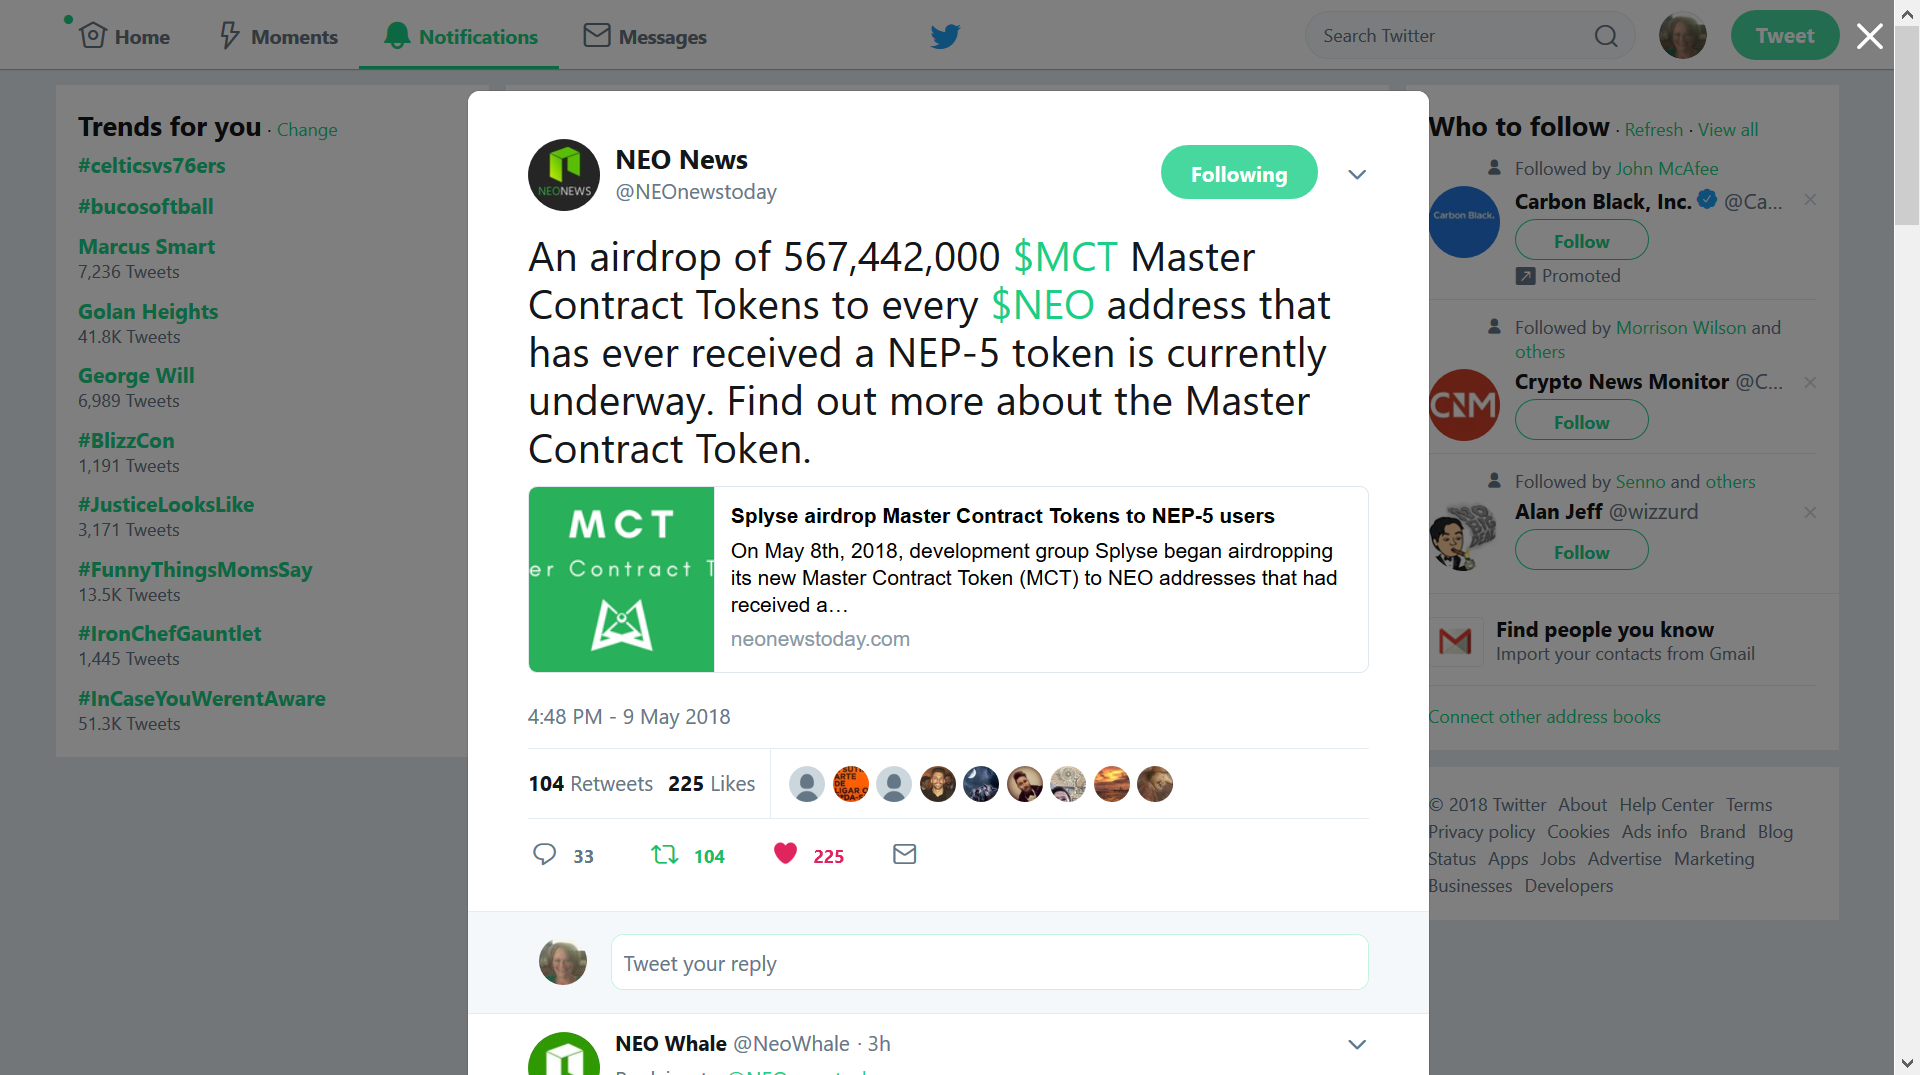 Screenshot-2018-5-9 NEO News on Twitter An airdrop of 567,442,000 $MCT Master Contract Tokens to every $NEO address that ha[...].png